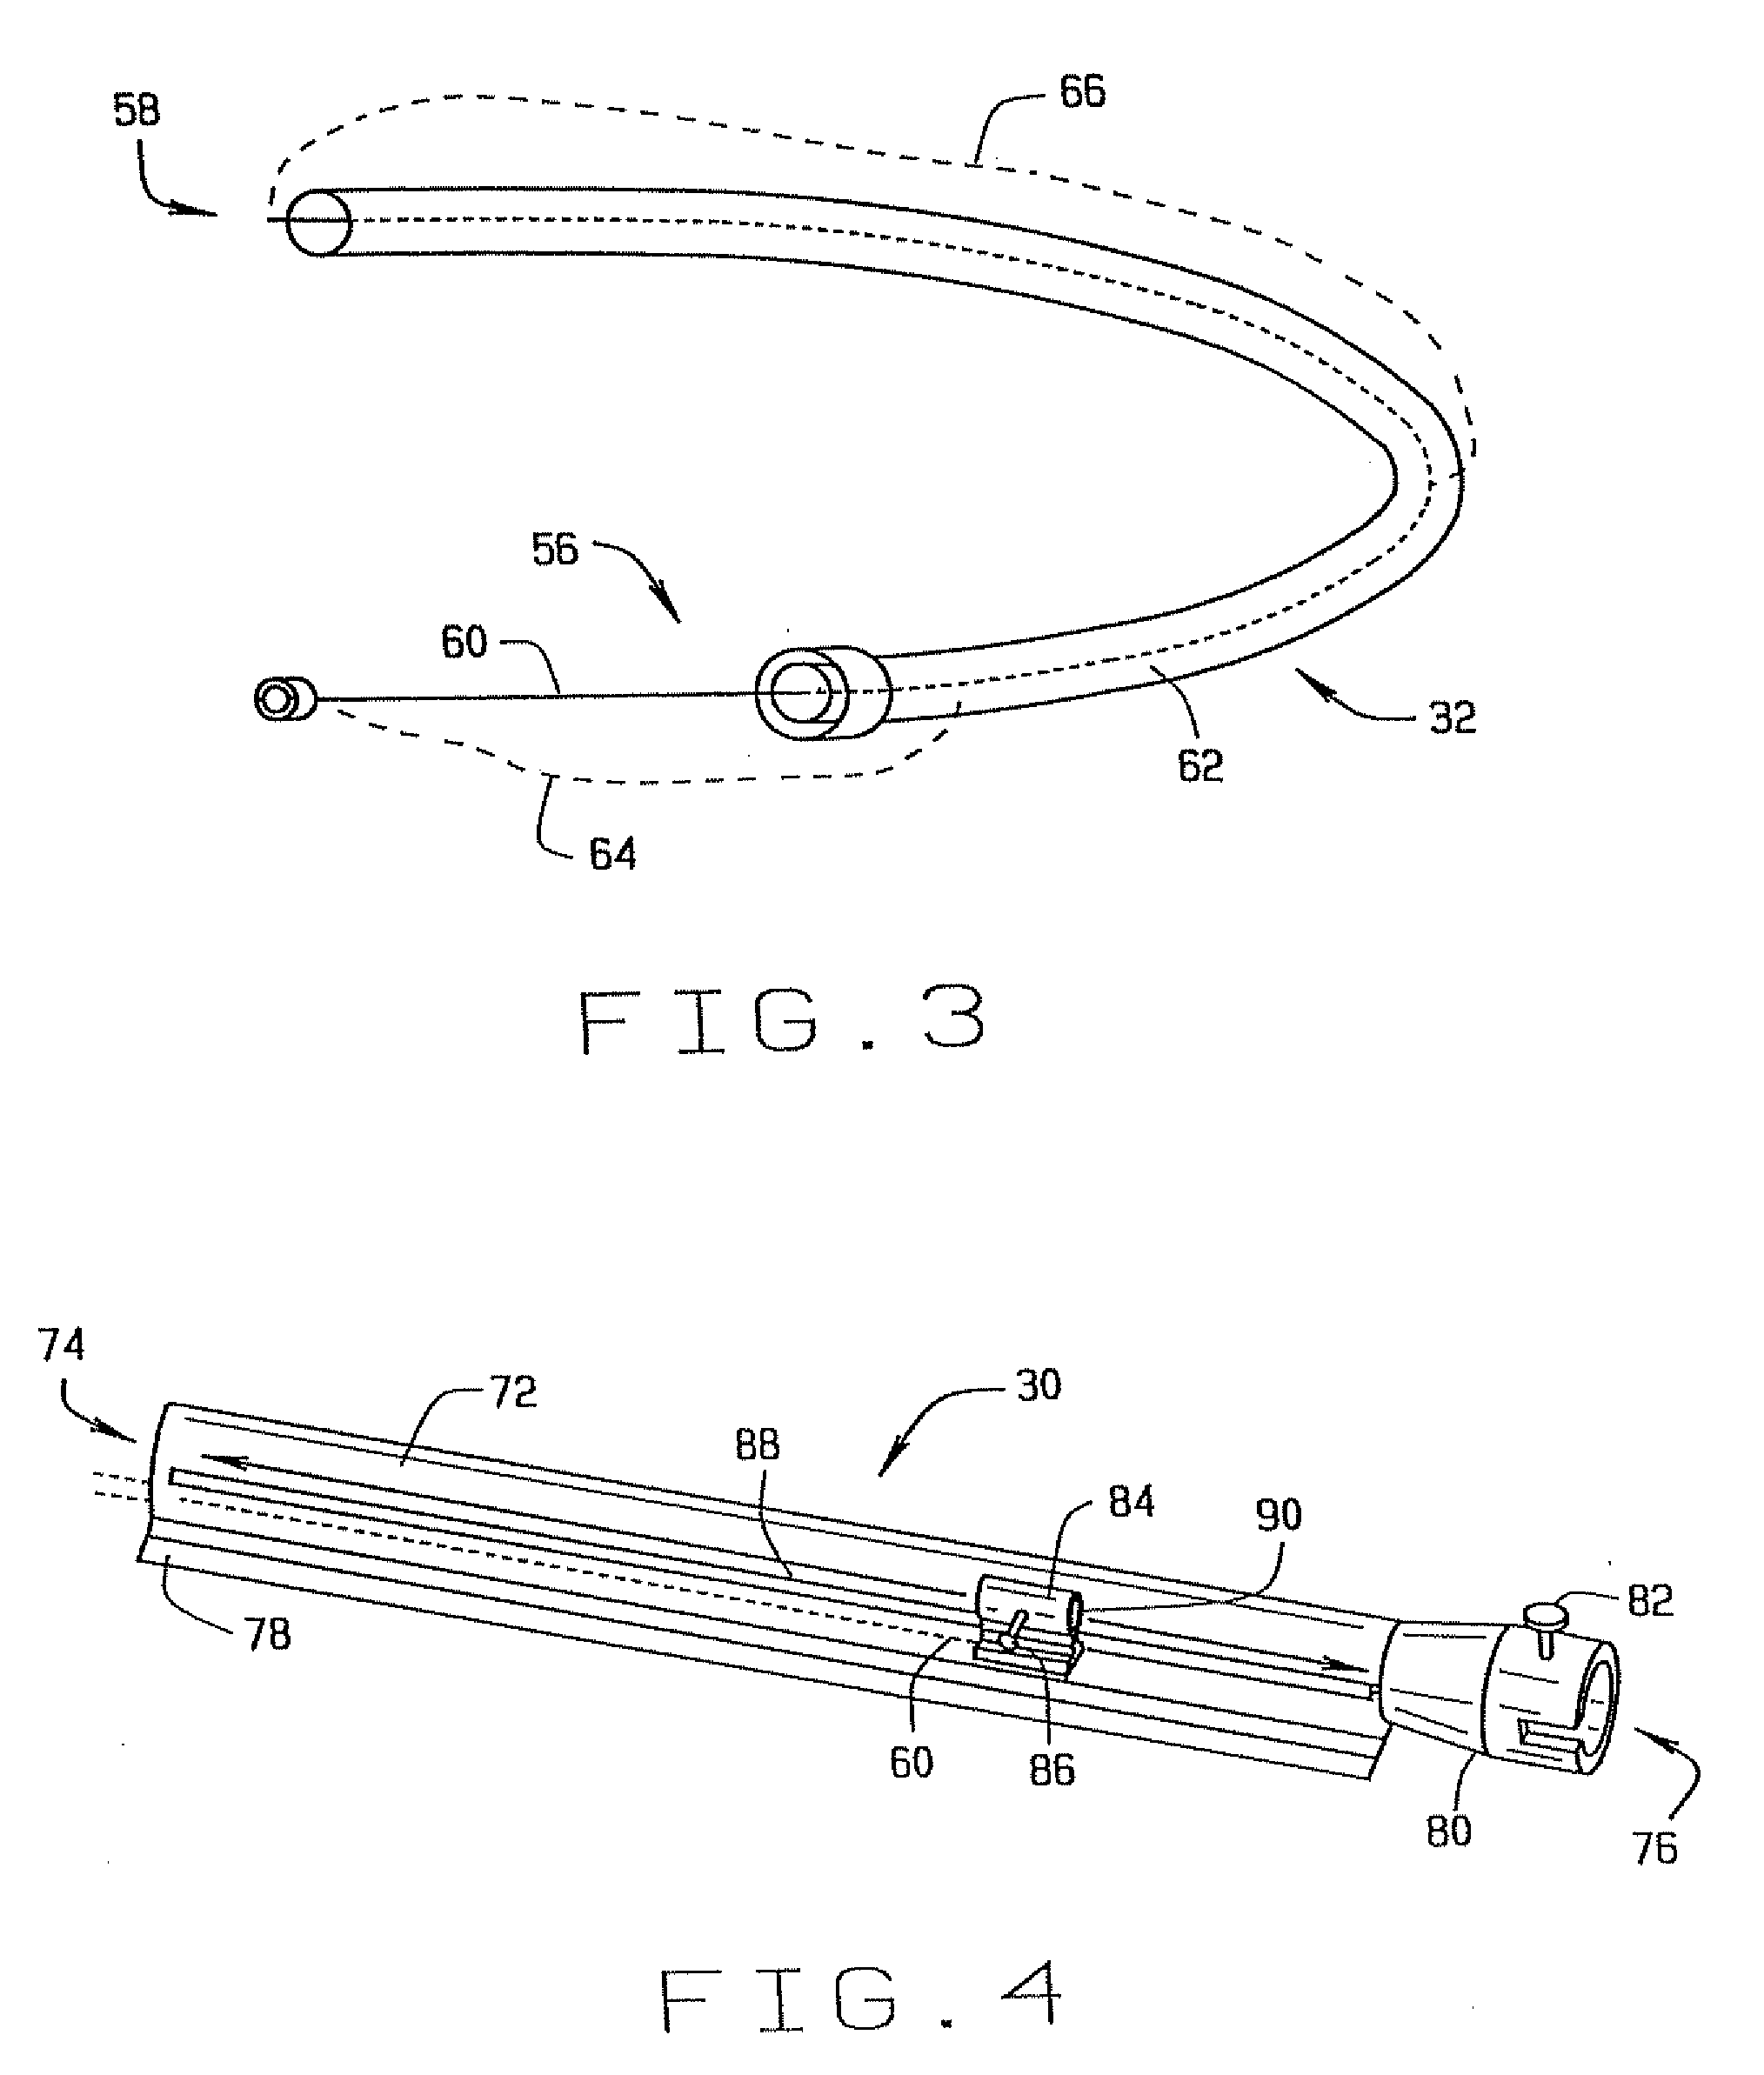 System and Methods for Advancing a Catheter